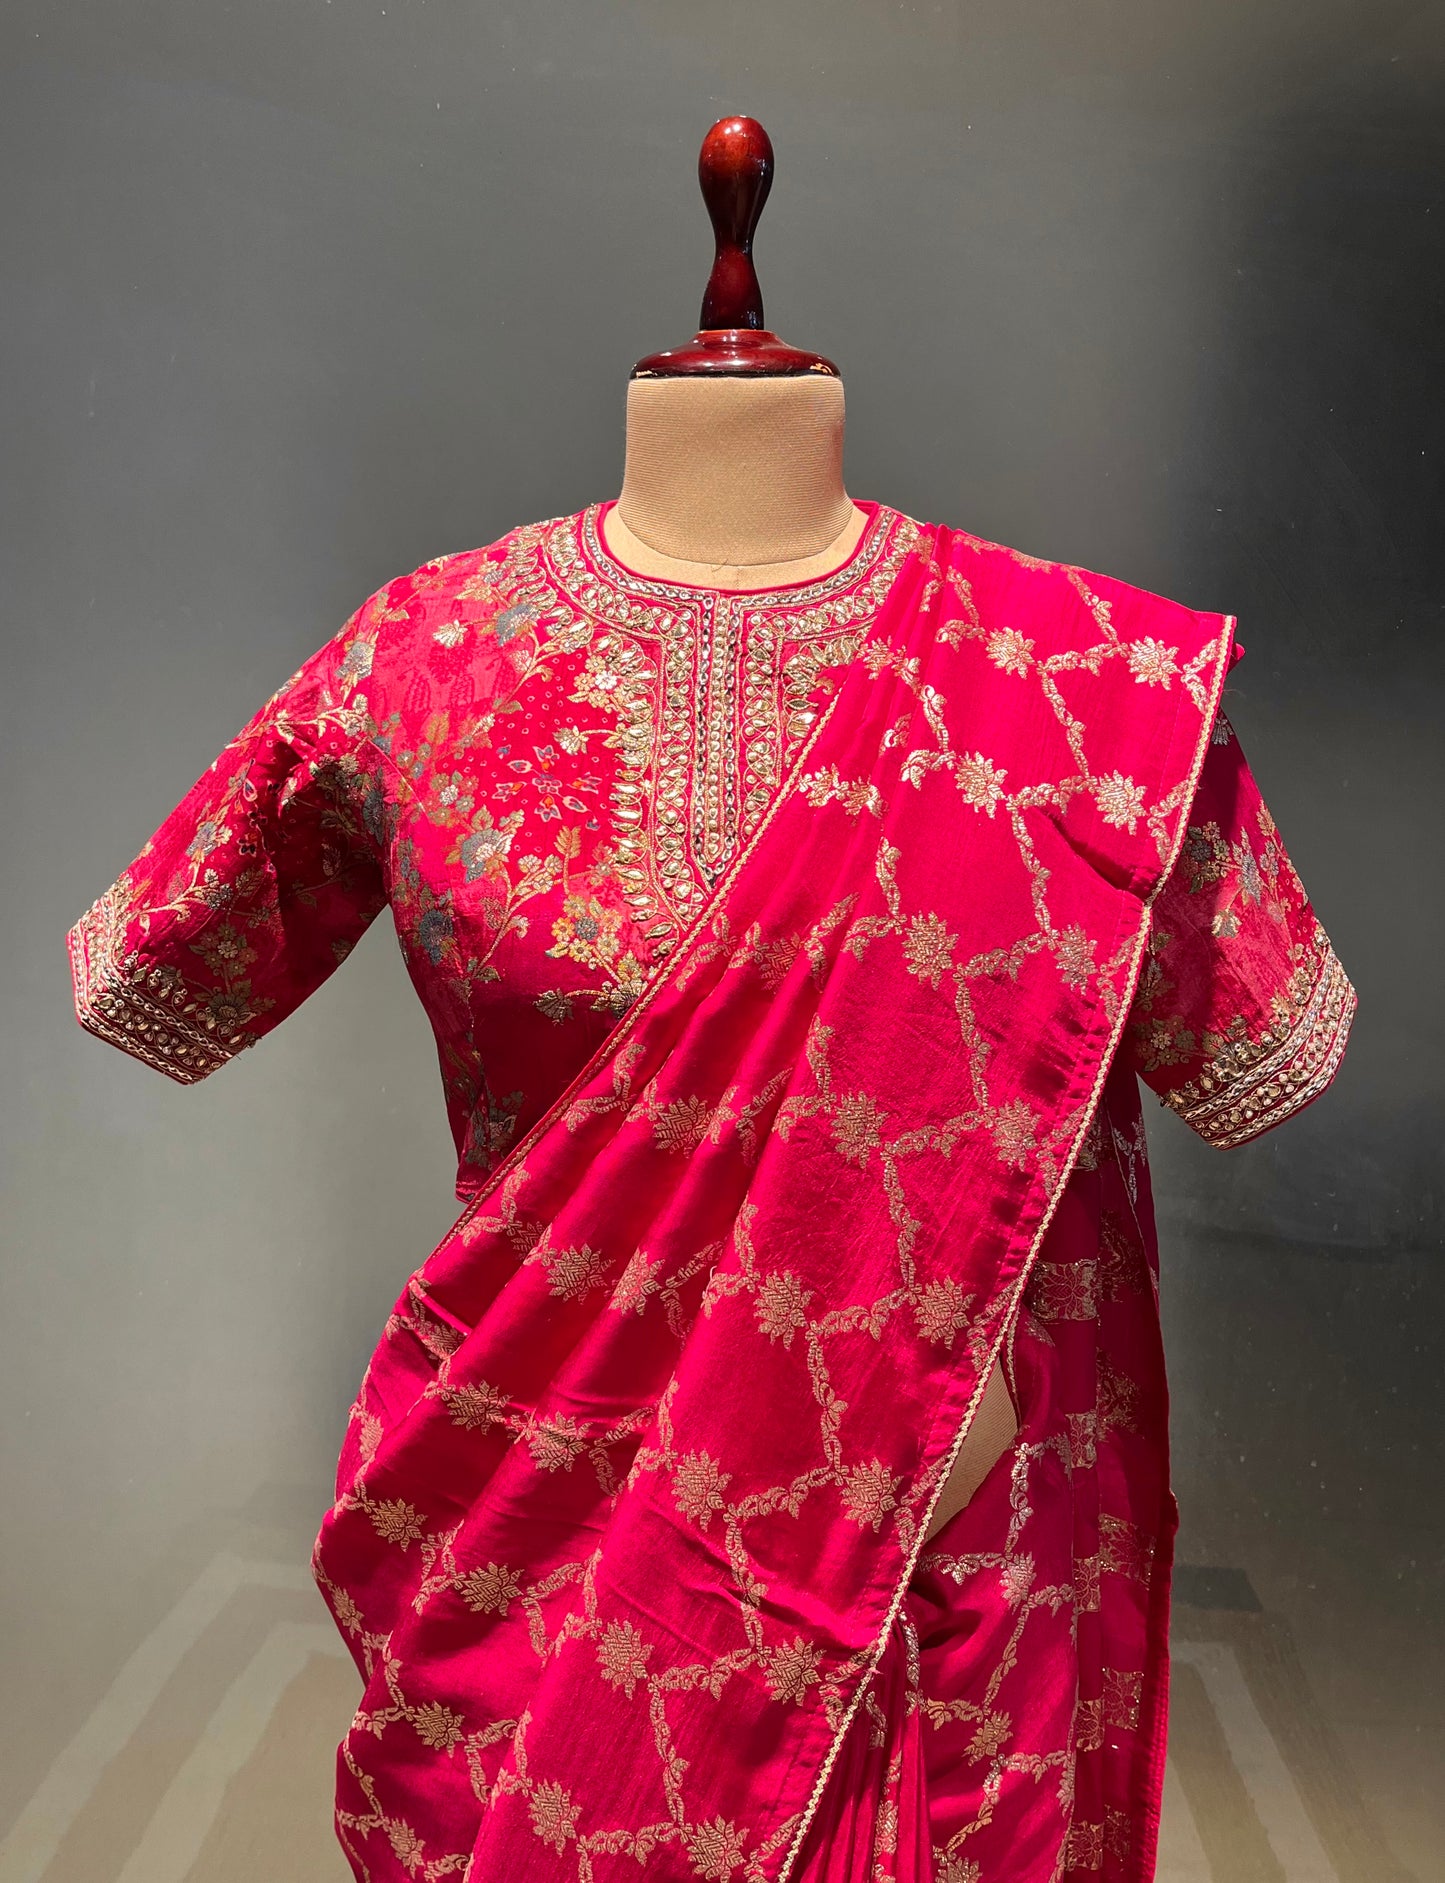 HOT PINK COLOUR DOLA SILK SAREE WITH READYMADE BLOUSE EMBELLISHED WITH GOTA PATTI WORK